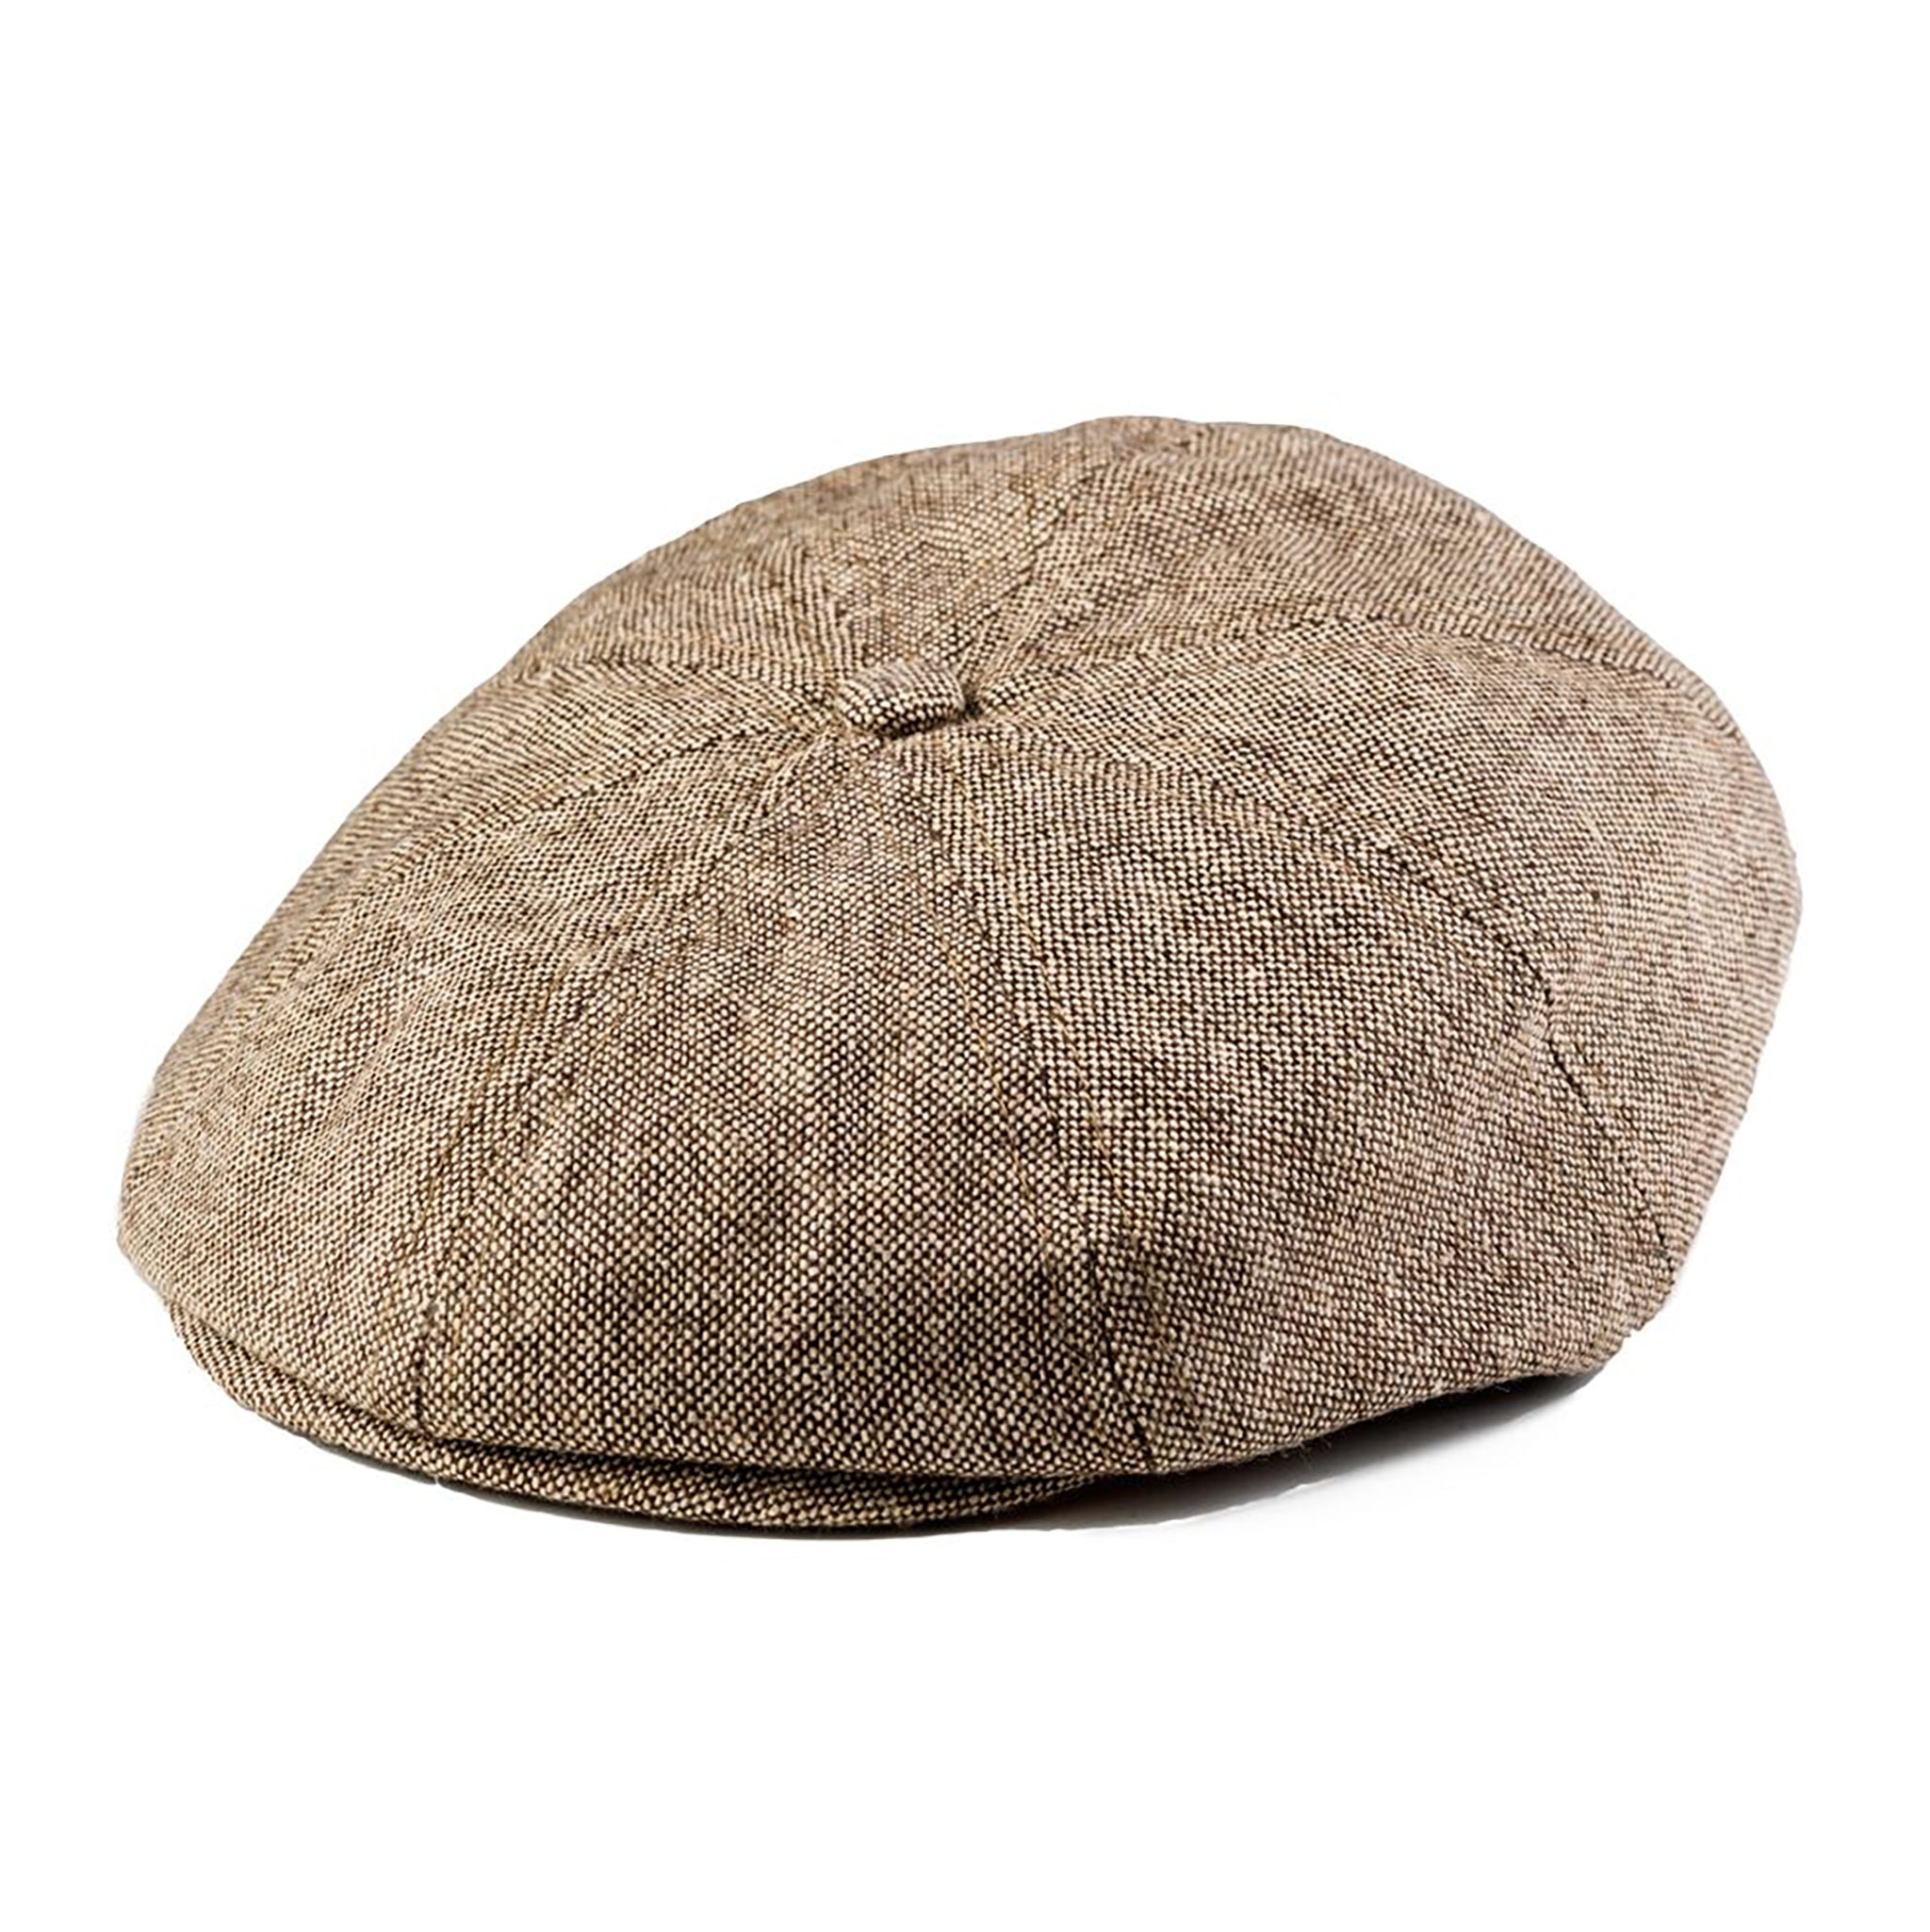 Boy's Hat Tan and Brown Newsboy Cap – Born To Love Clothing